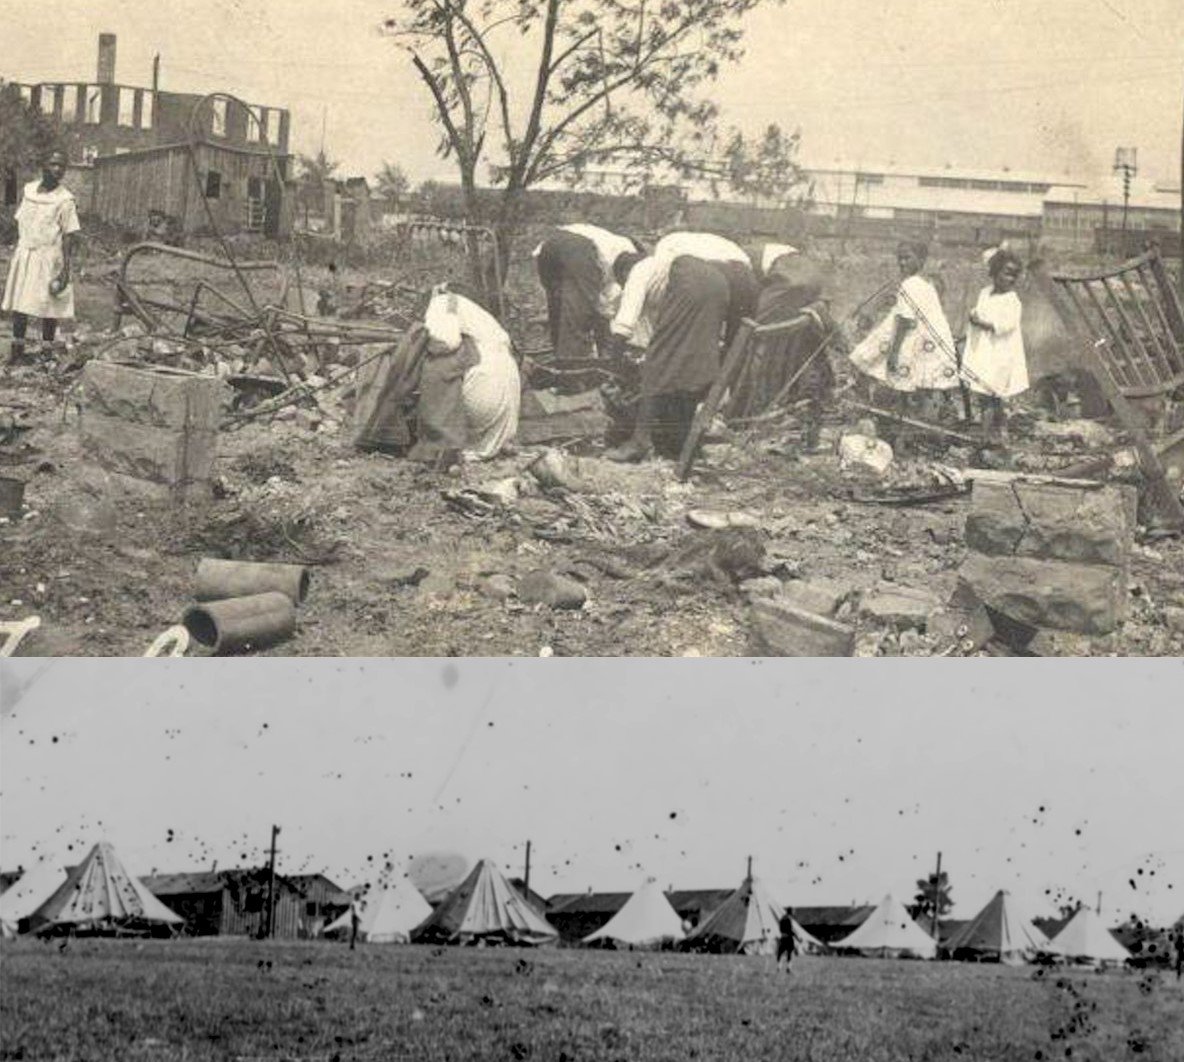 tents of refugees